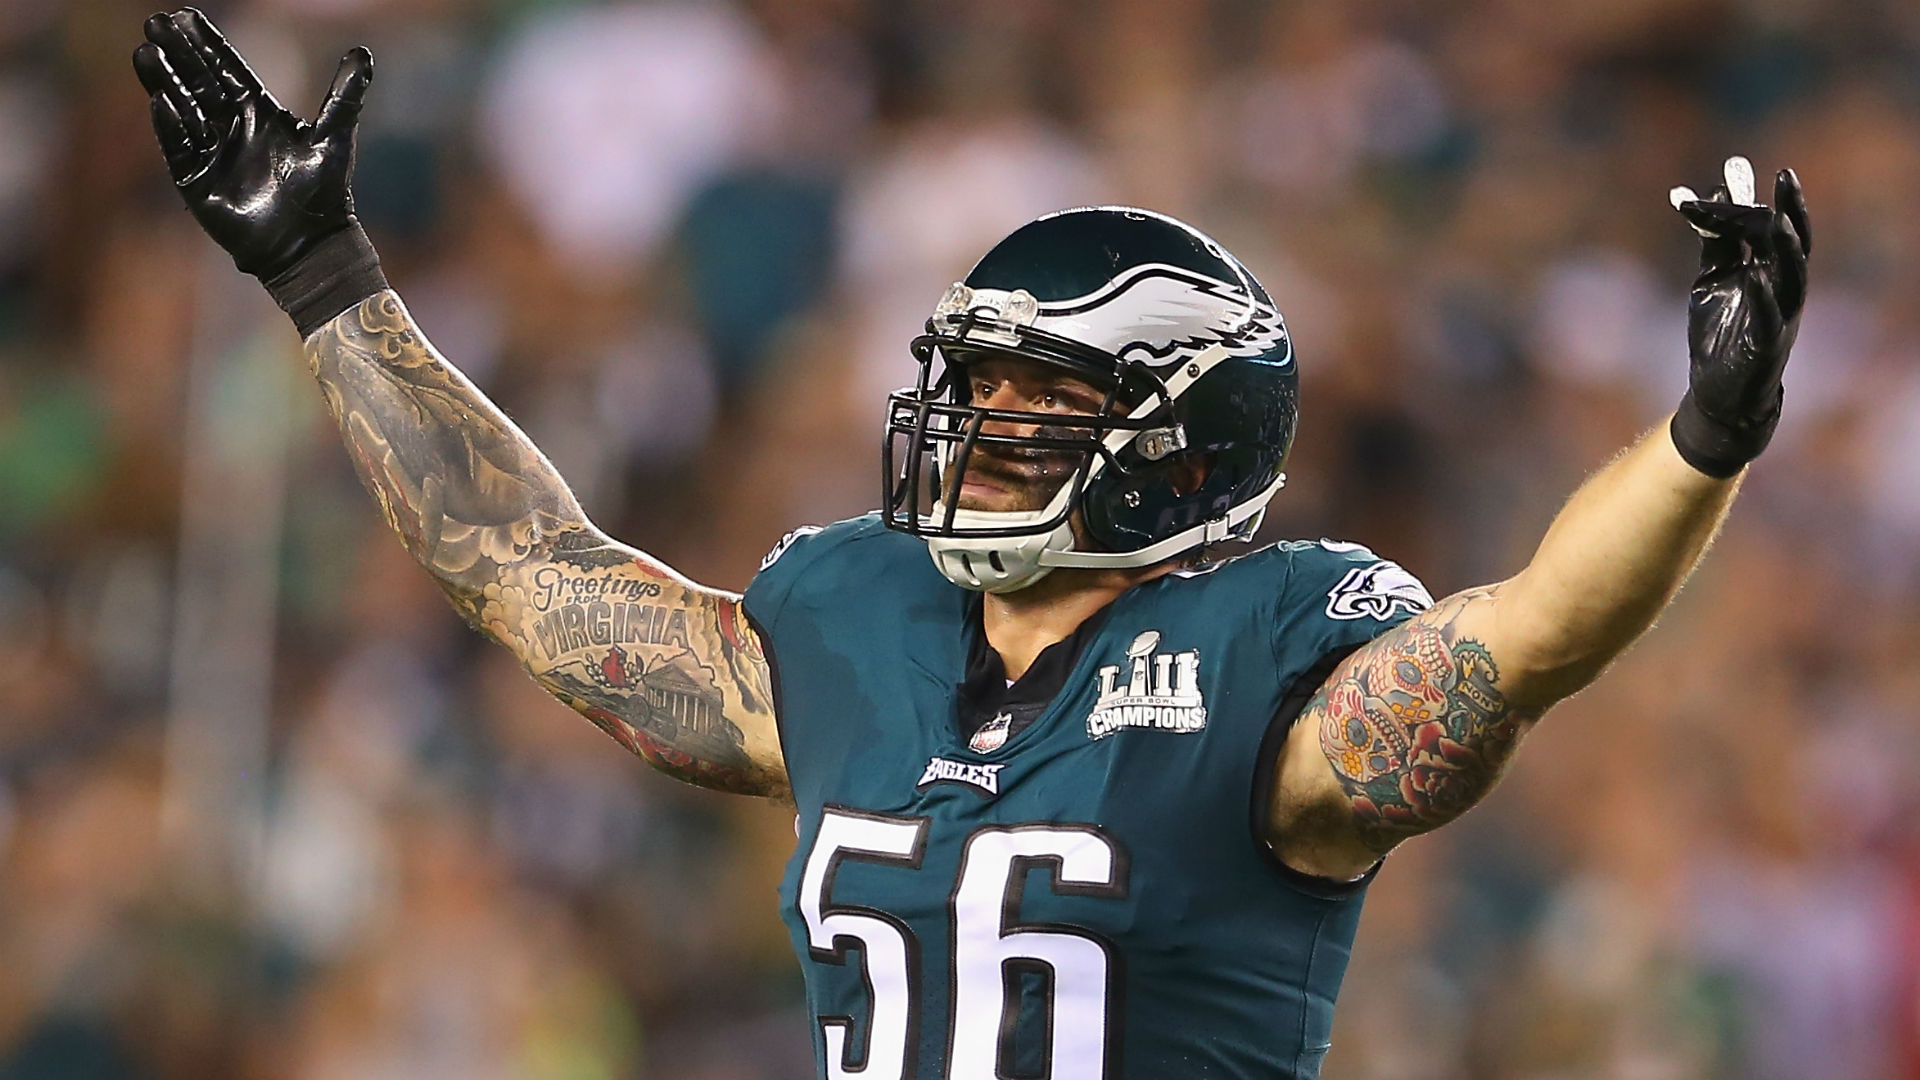 After 11 seasons in the NFL, the Philadelphia Eagles' Chris Long retired.